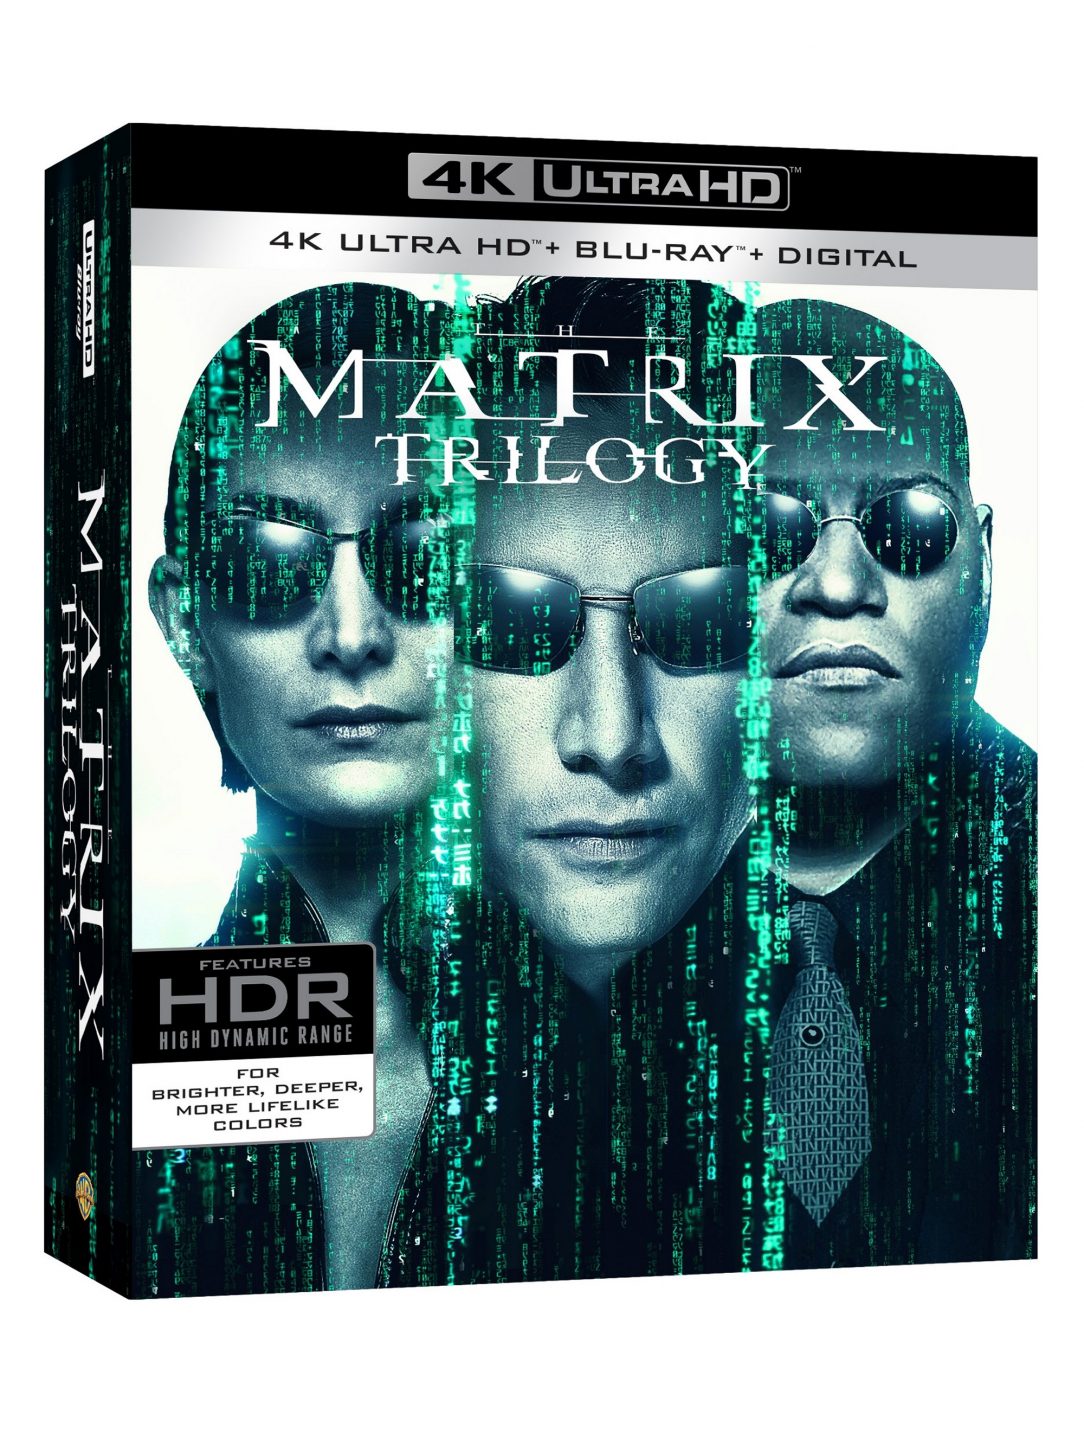 The Matrix Trilogy 4K Ultra HD Combo Pack cover (Warner Bros. Home Entertainment)